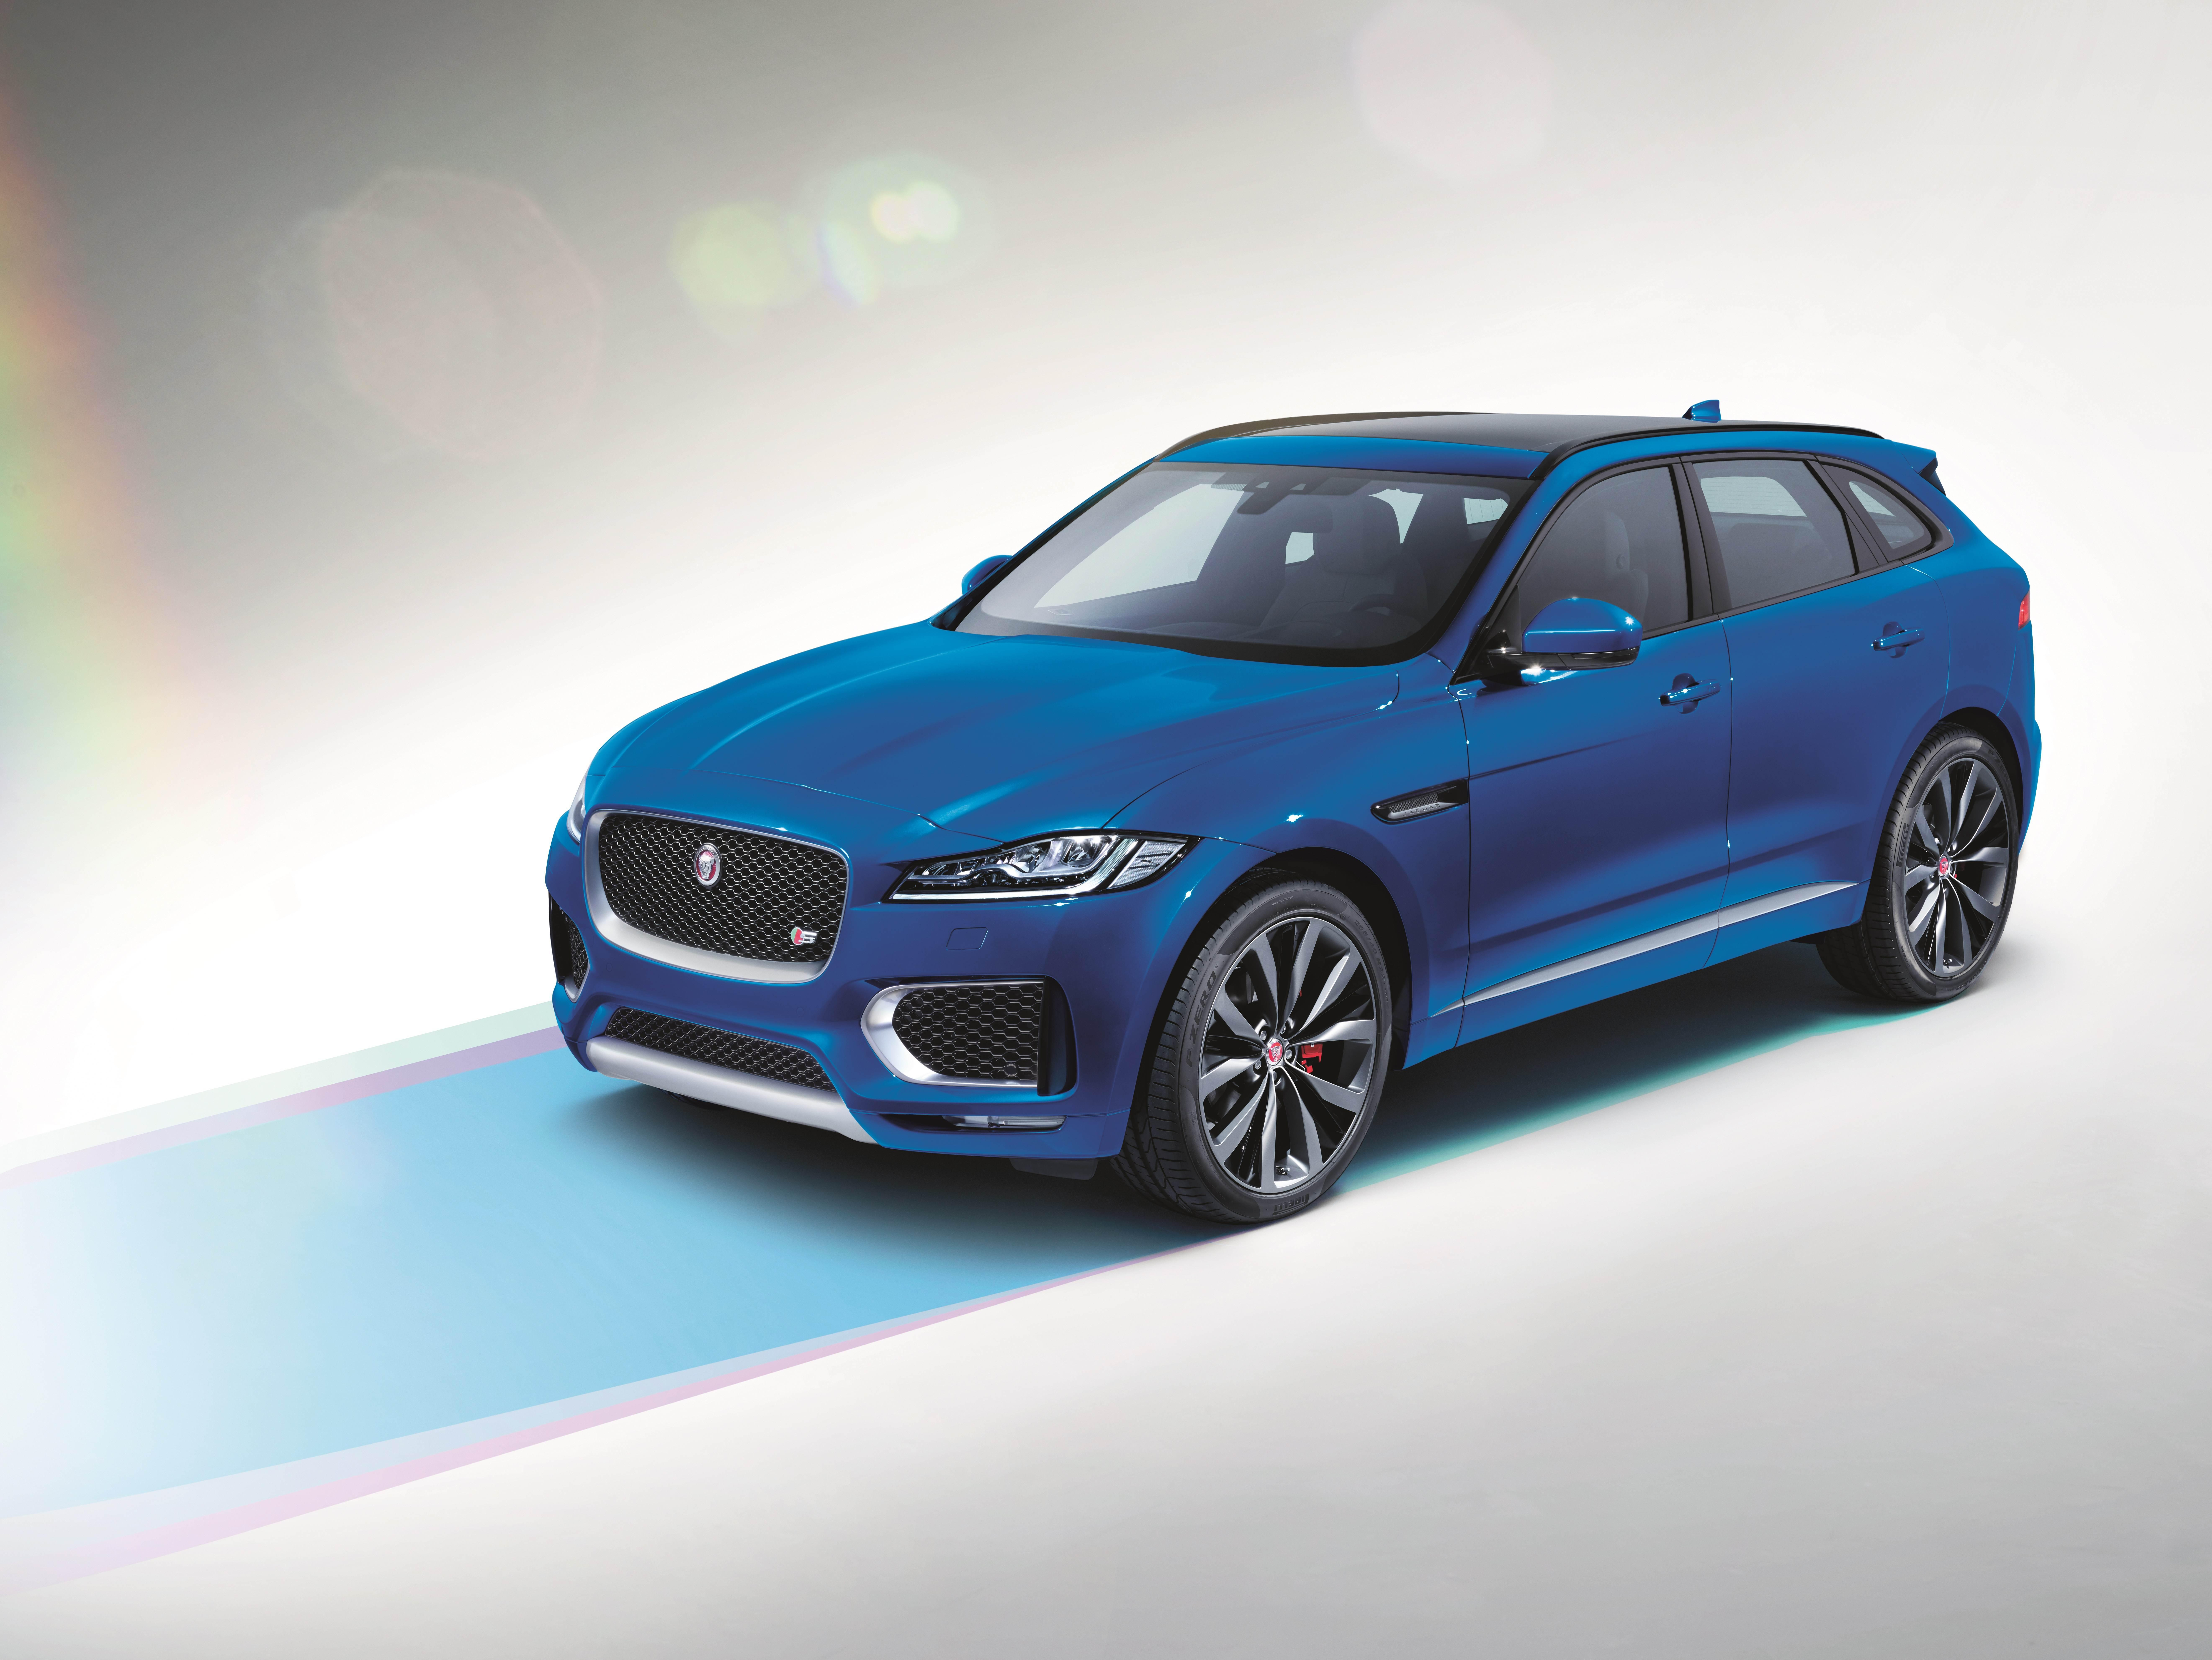 2017 Jaguar FPACE First Edition News and Information - .com